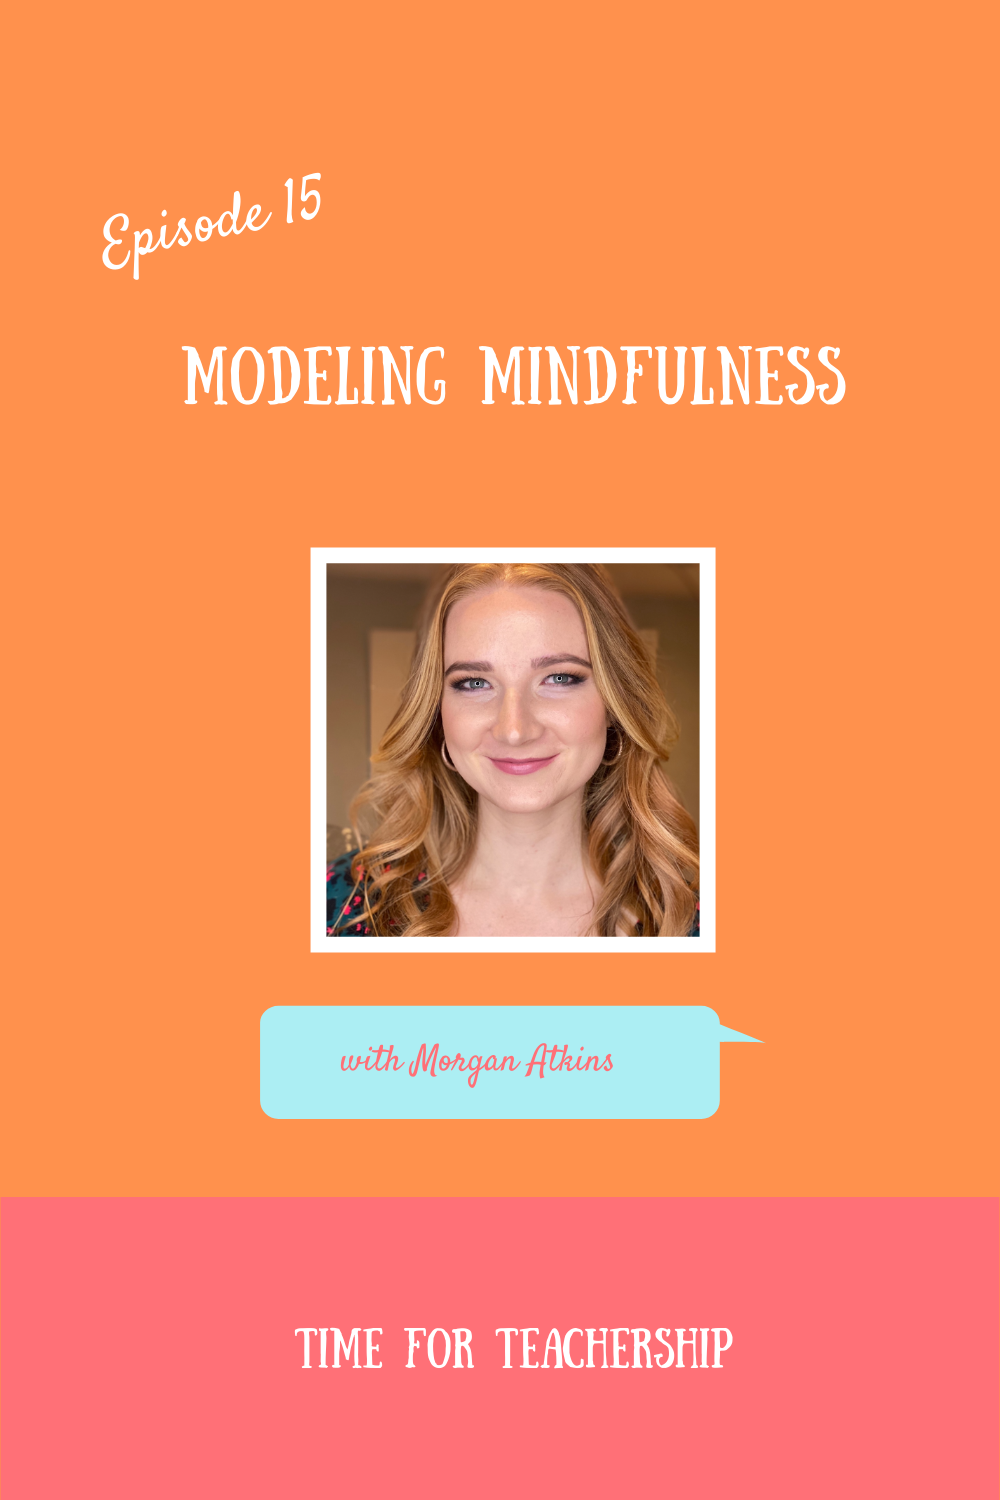 15. Modeling Mindfulness with Morgan Atkins. Today's episode features the experiences of Morgan Atkins, a teacher with an emphasis in SEL (Social Emotional Learning) who managed to improve her students' mental wellbeing through mindfulness.Check out the Time for Teachership blog post for how to be mindful at school. For more tips and #teacherfreebies, sign up for weekly emails at bit.ly/lindsayletter